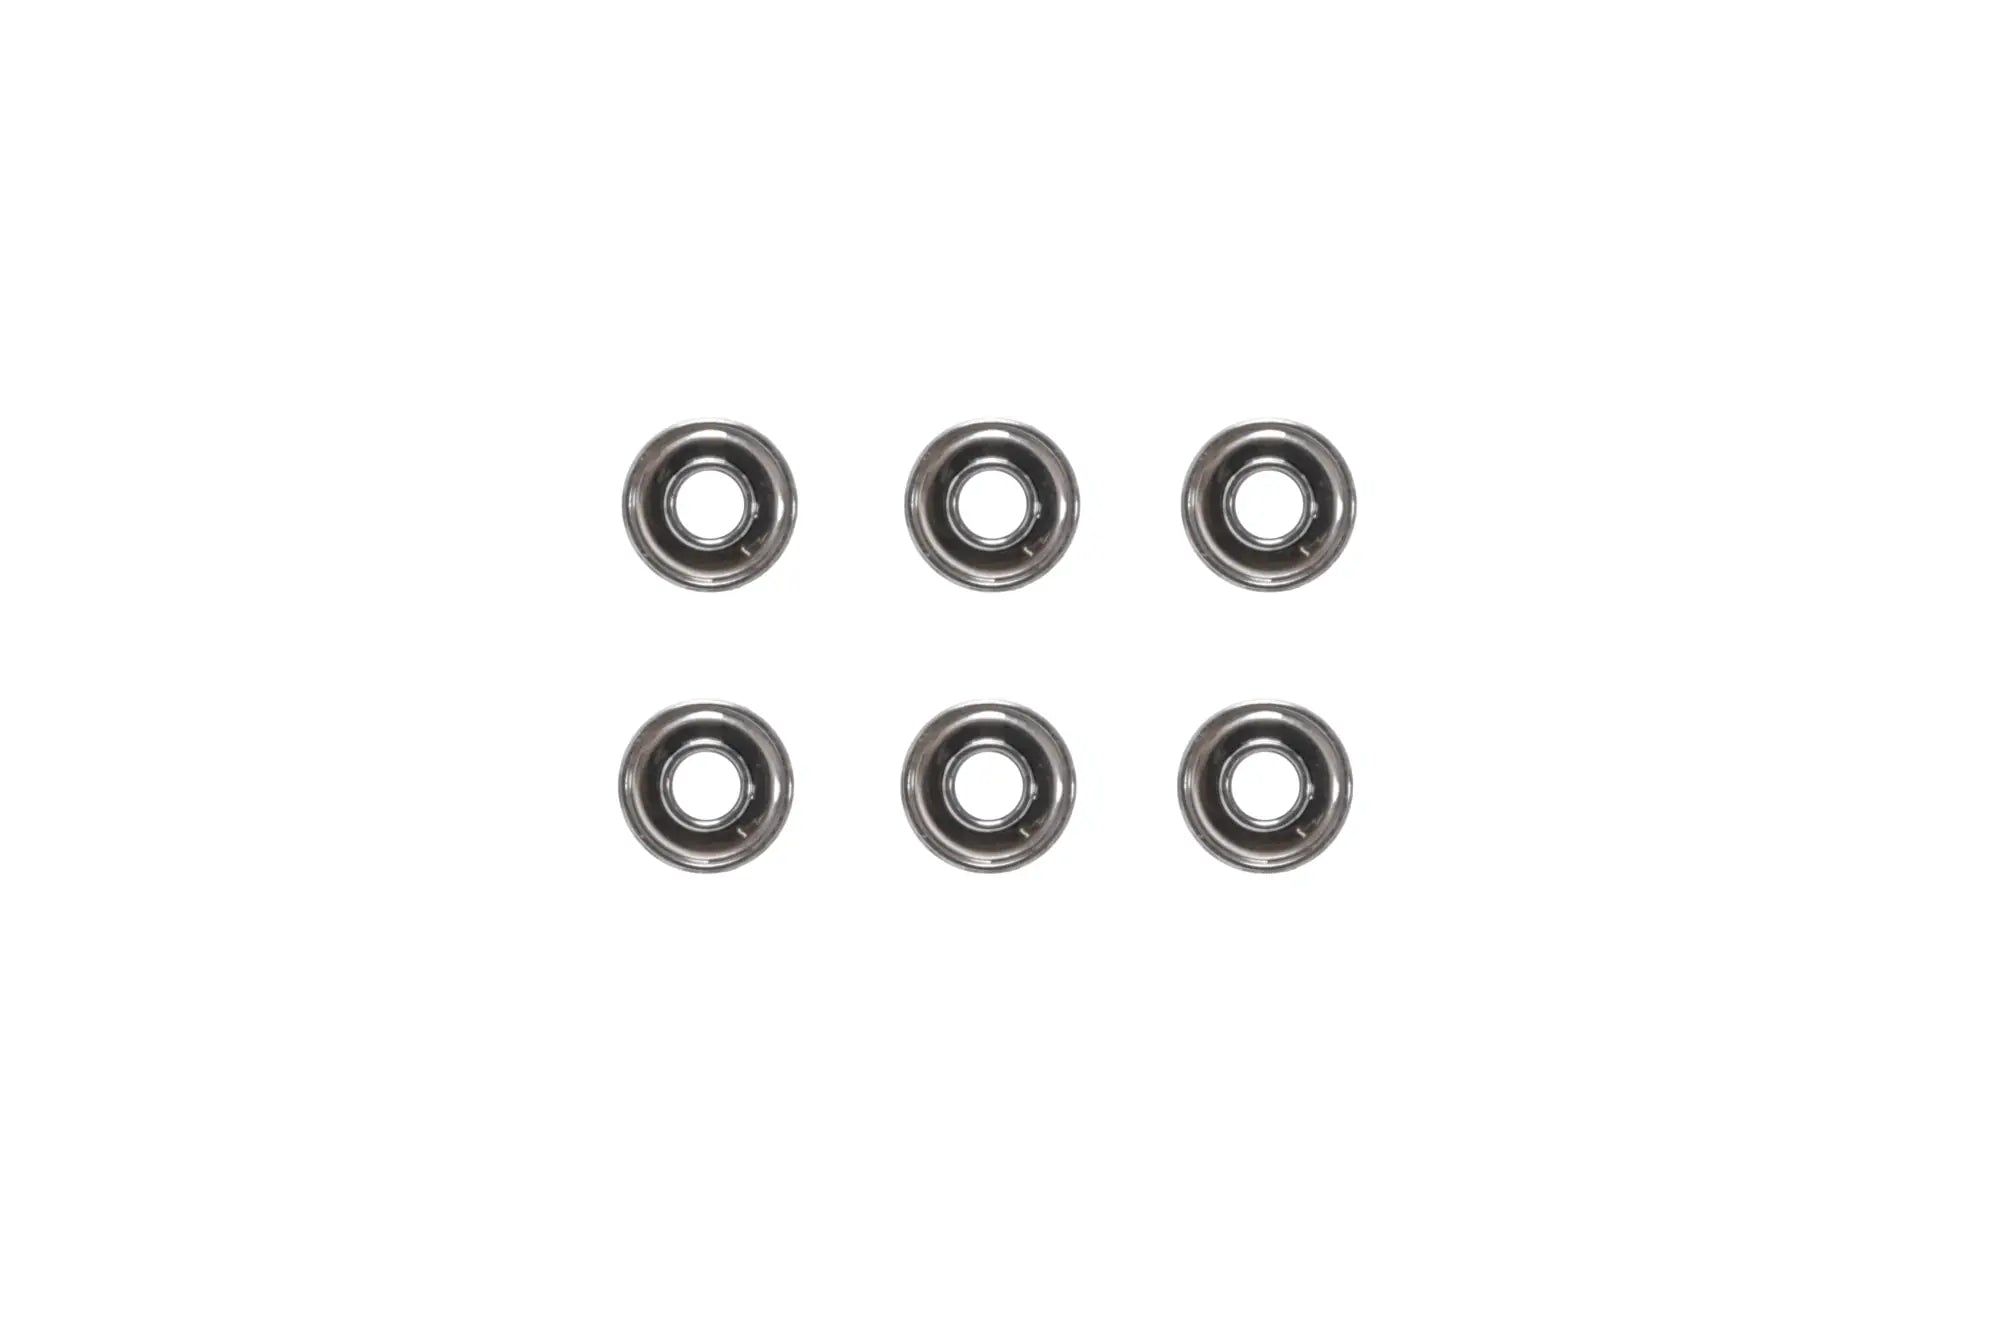 8mm EPeS ball bearing set for A&K M249 replicas-1